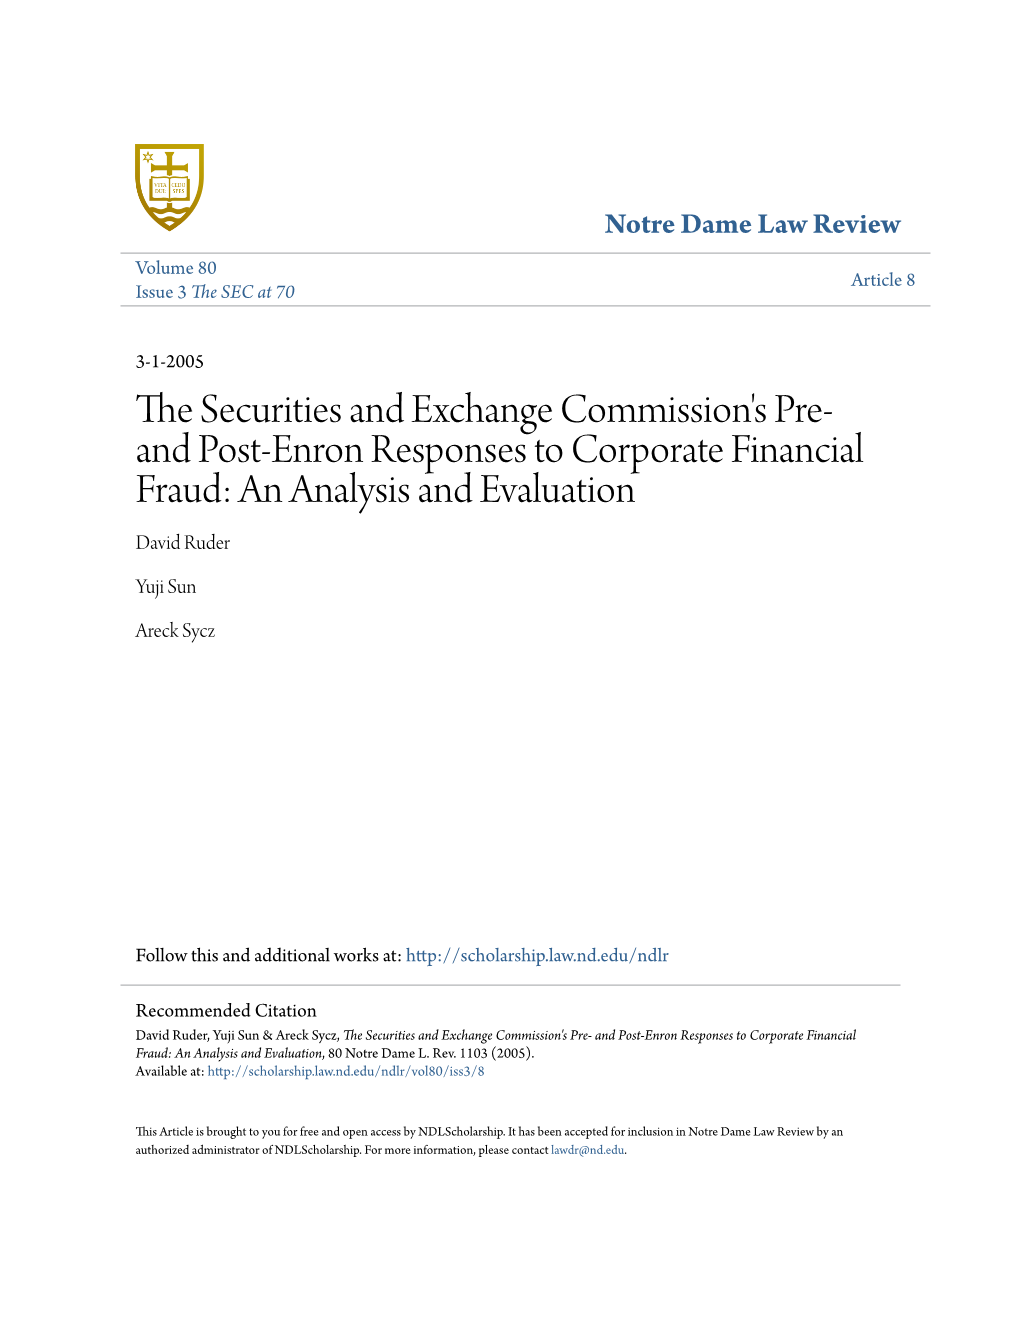 The Securities and Exchange Commission's Pre- and Post-Enron Responses to Corporate Financial Fraud: an Analysis and Evaluation, 80 Notre Dame L